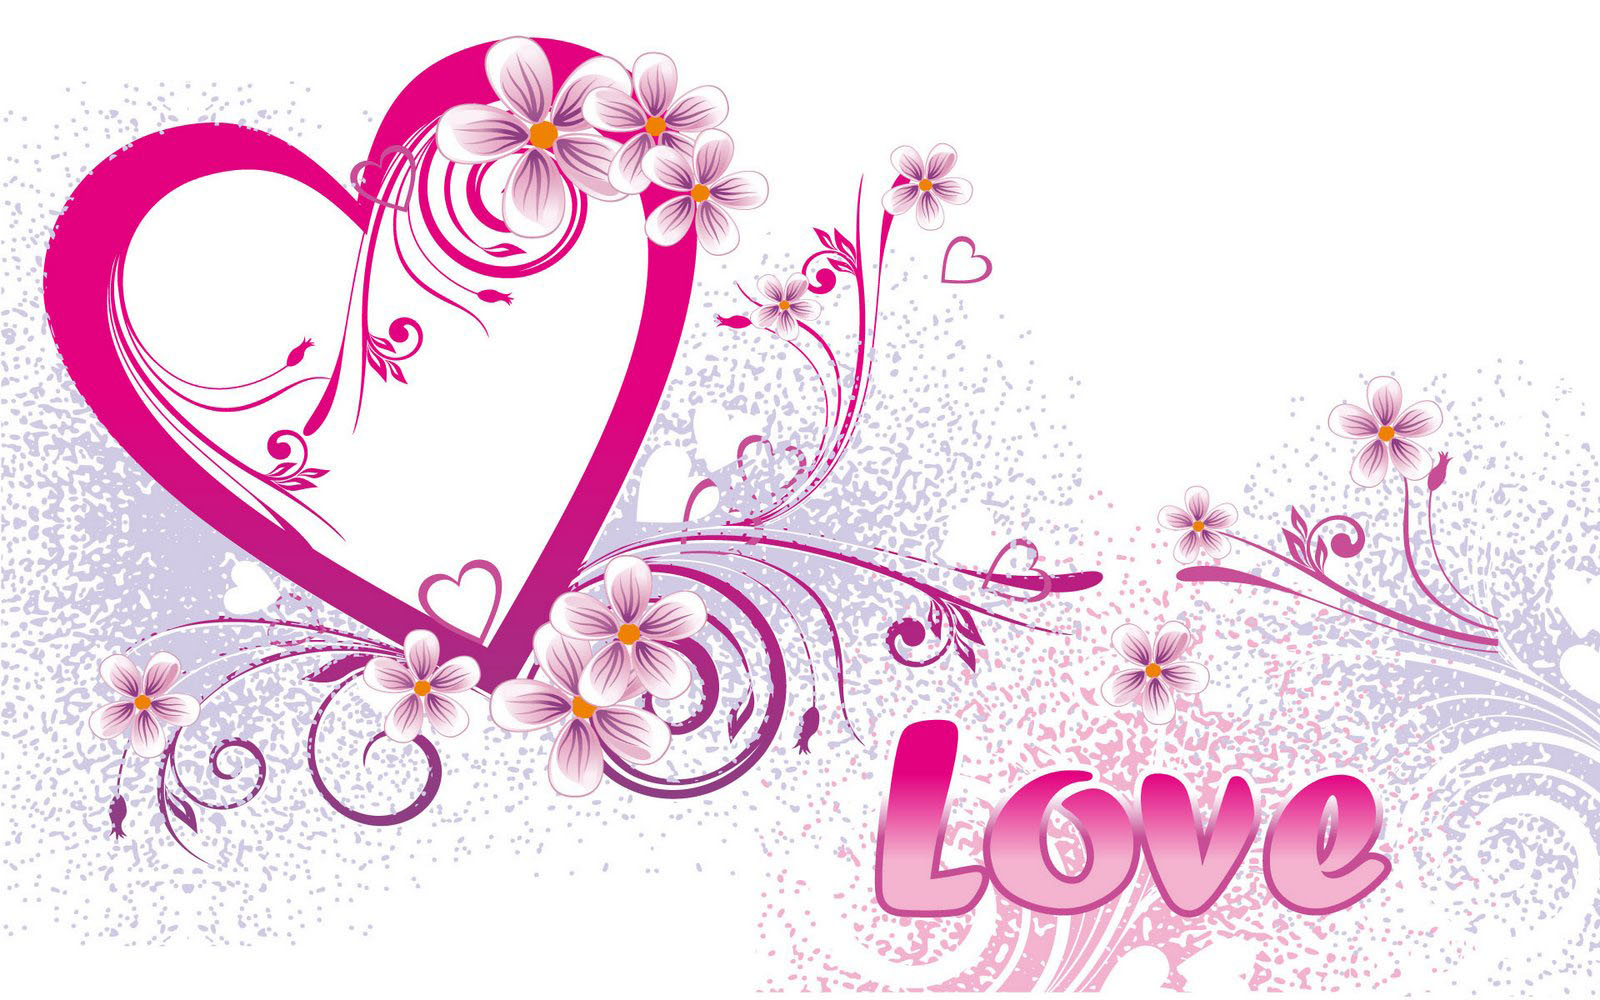 Wallpapers New Love Backgrounds